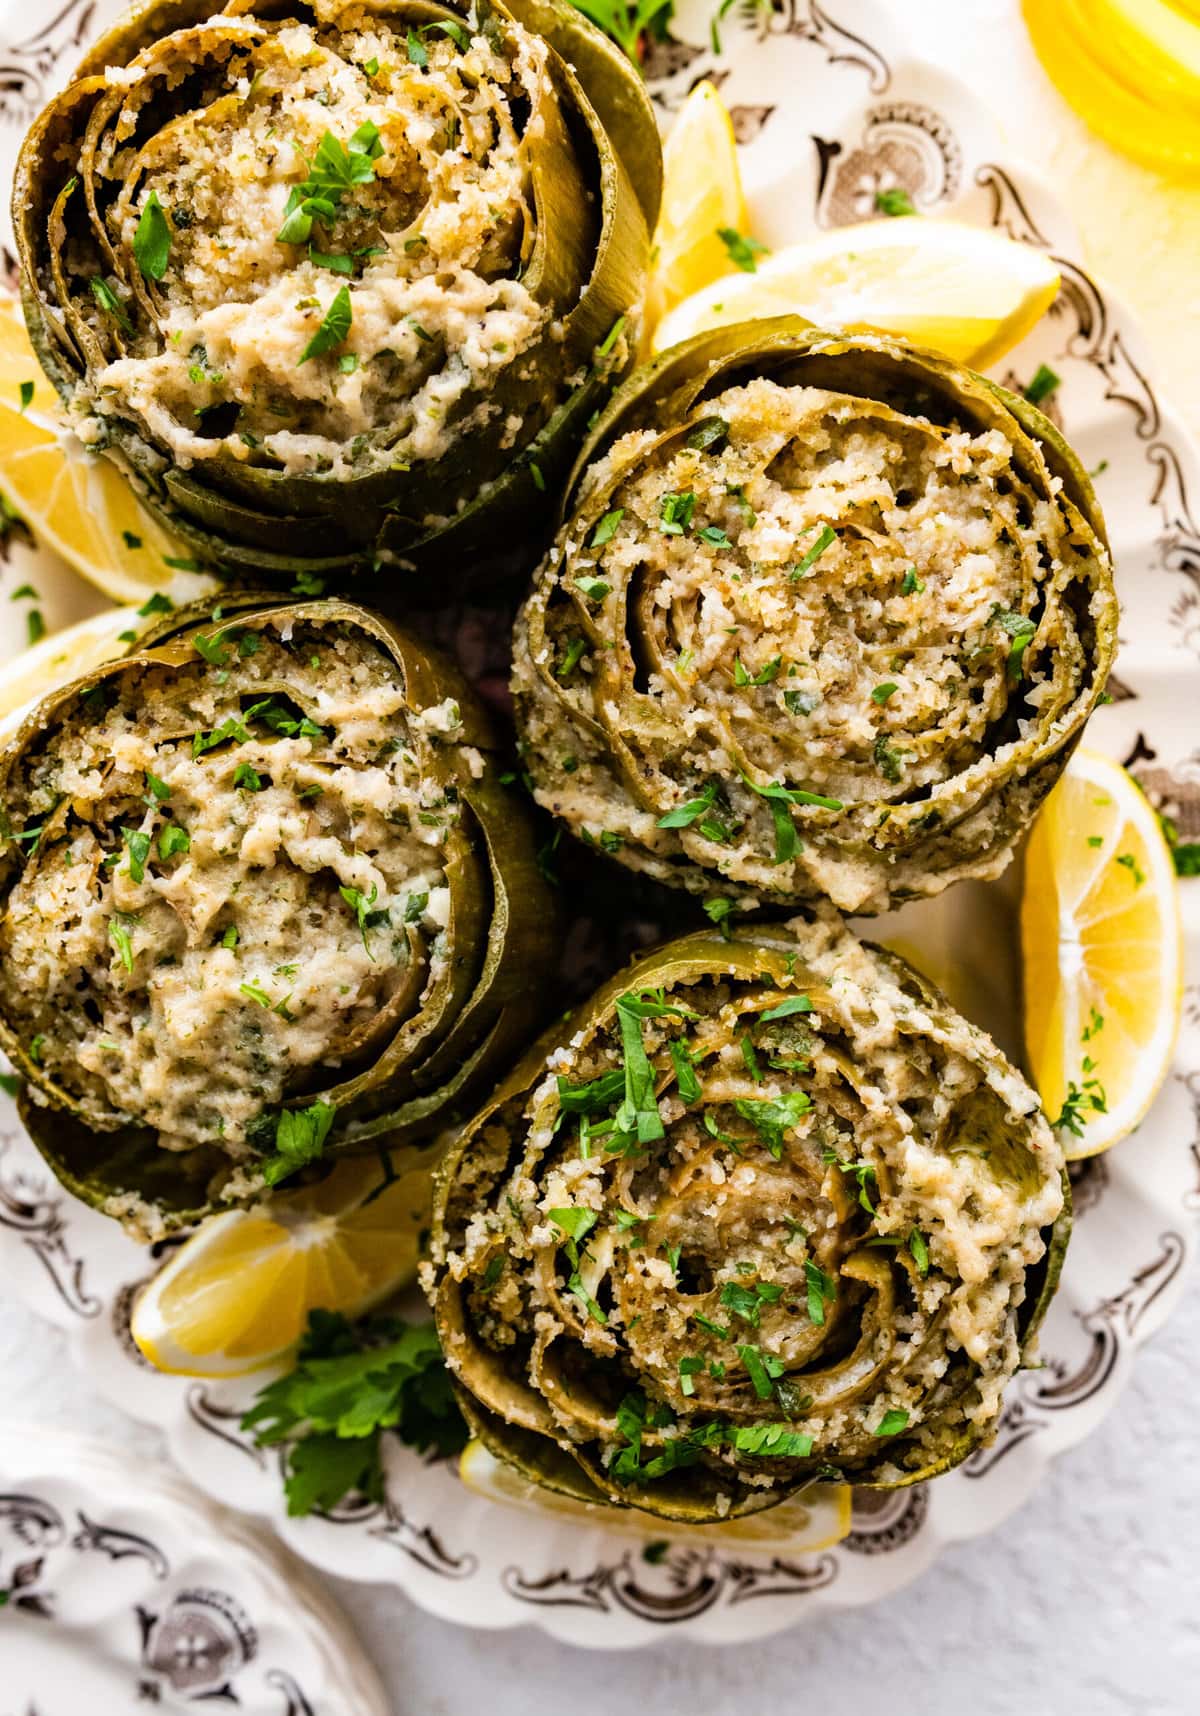 Cooked artichokes on a platter with lemon wedges on the side. Parsley on top.